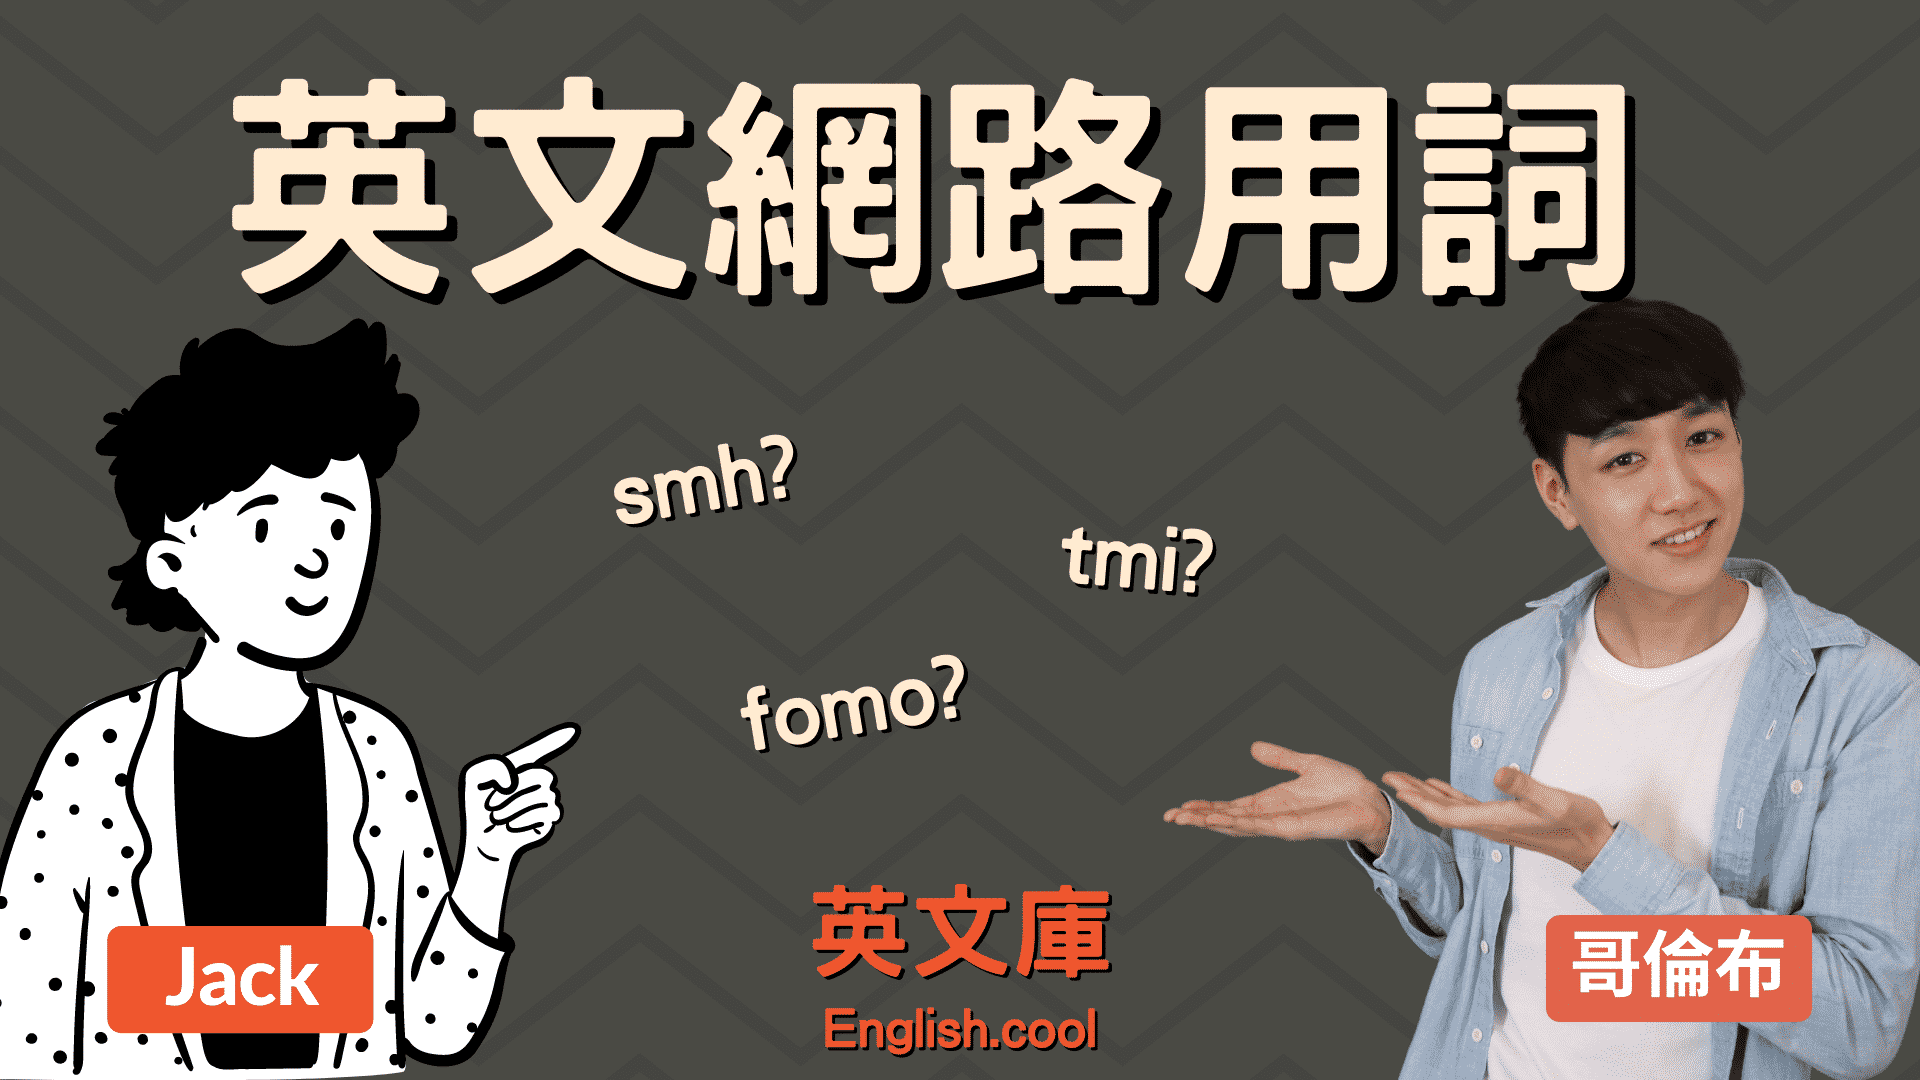 You are currently viewing 【網路用詞】 smh、tmi、fomo、ftw 是什麼意思？ 來一次搞懂！